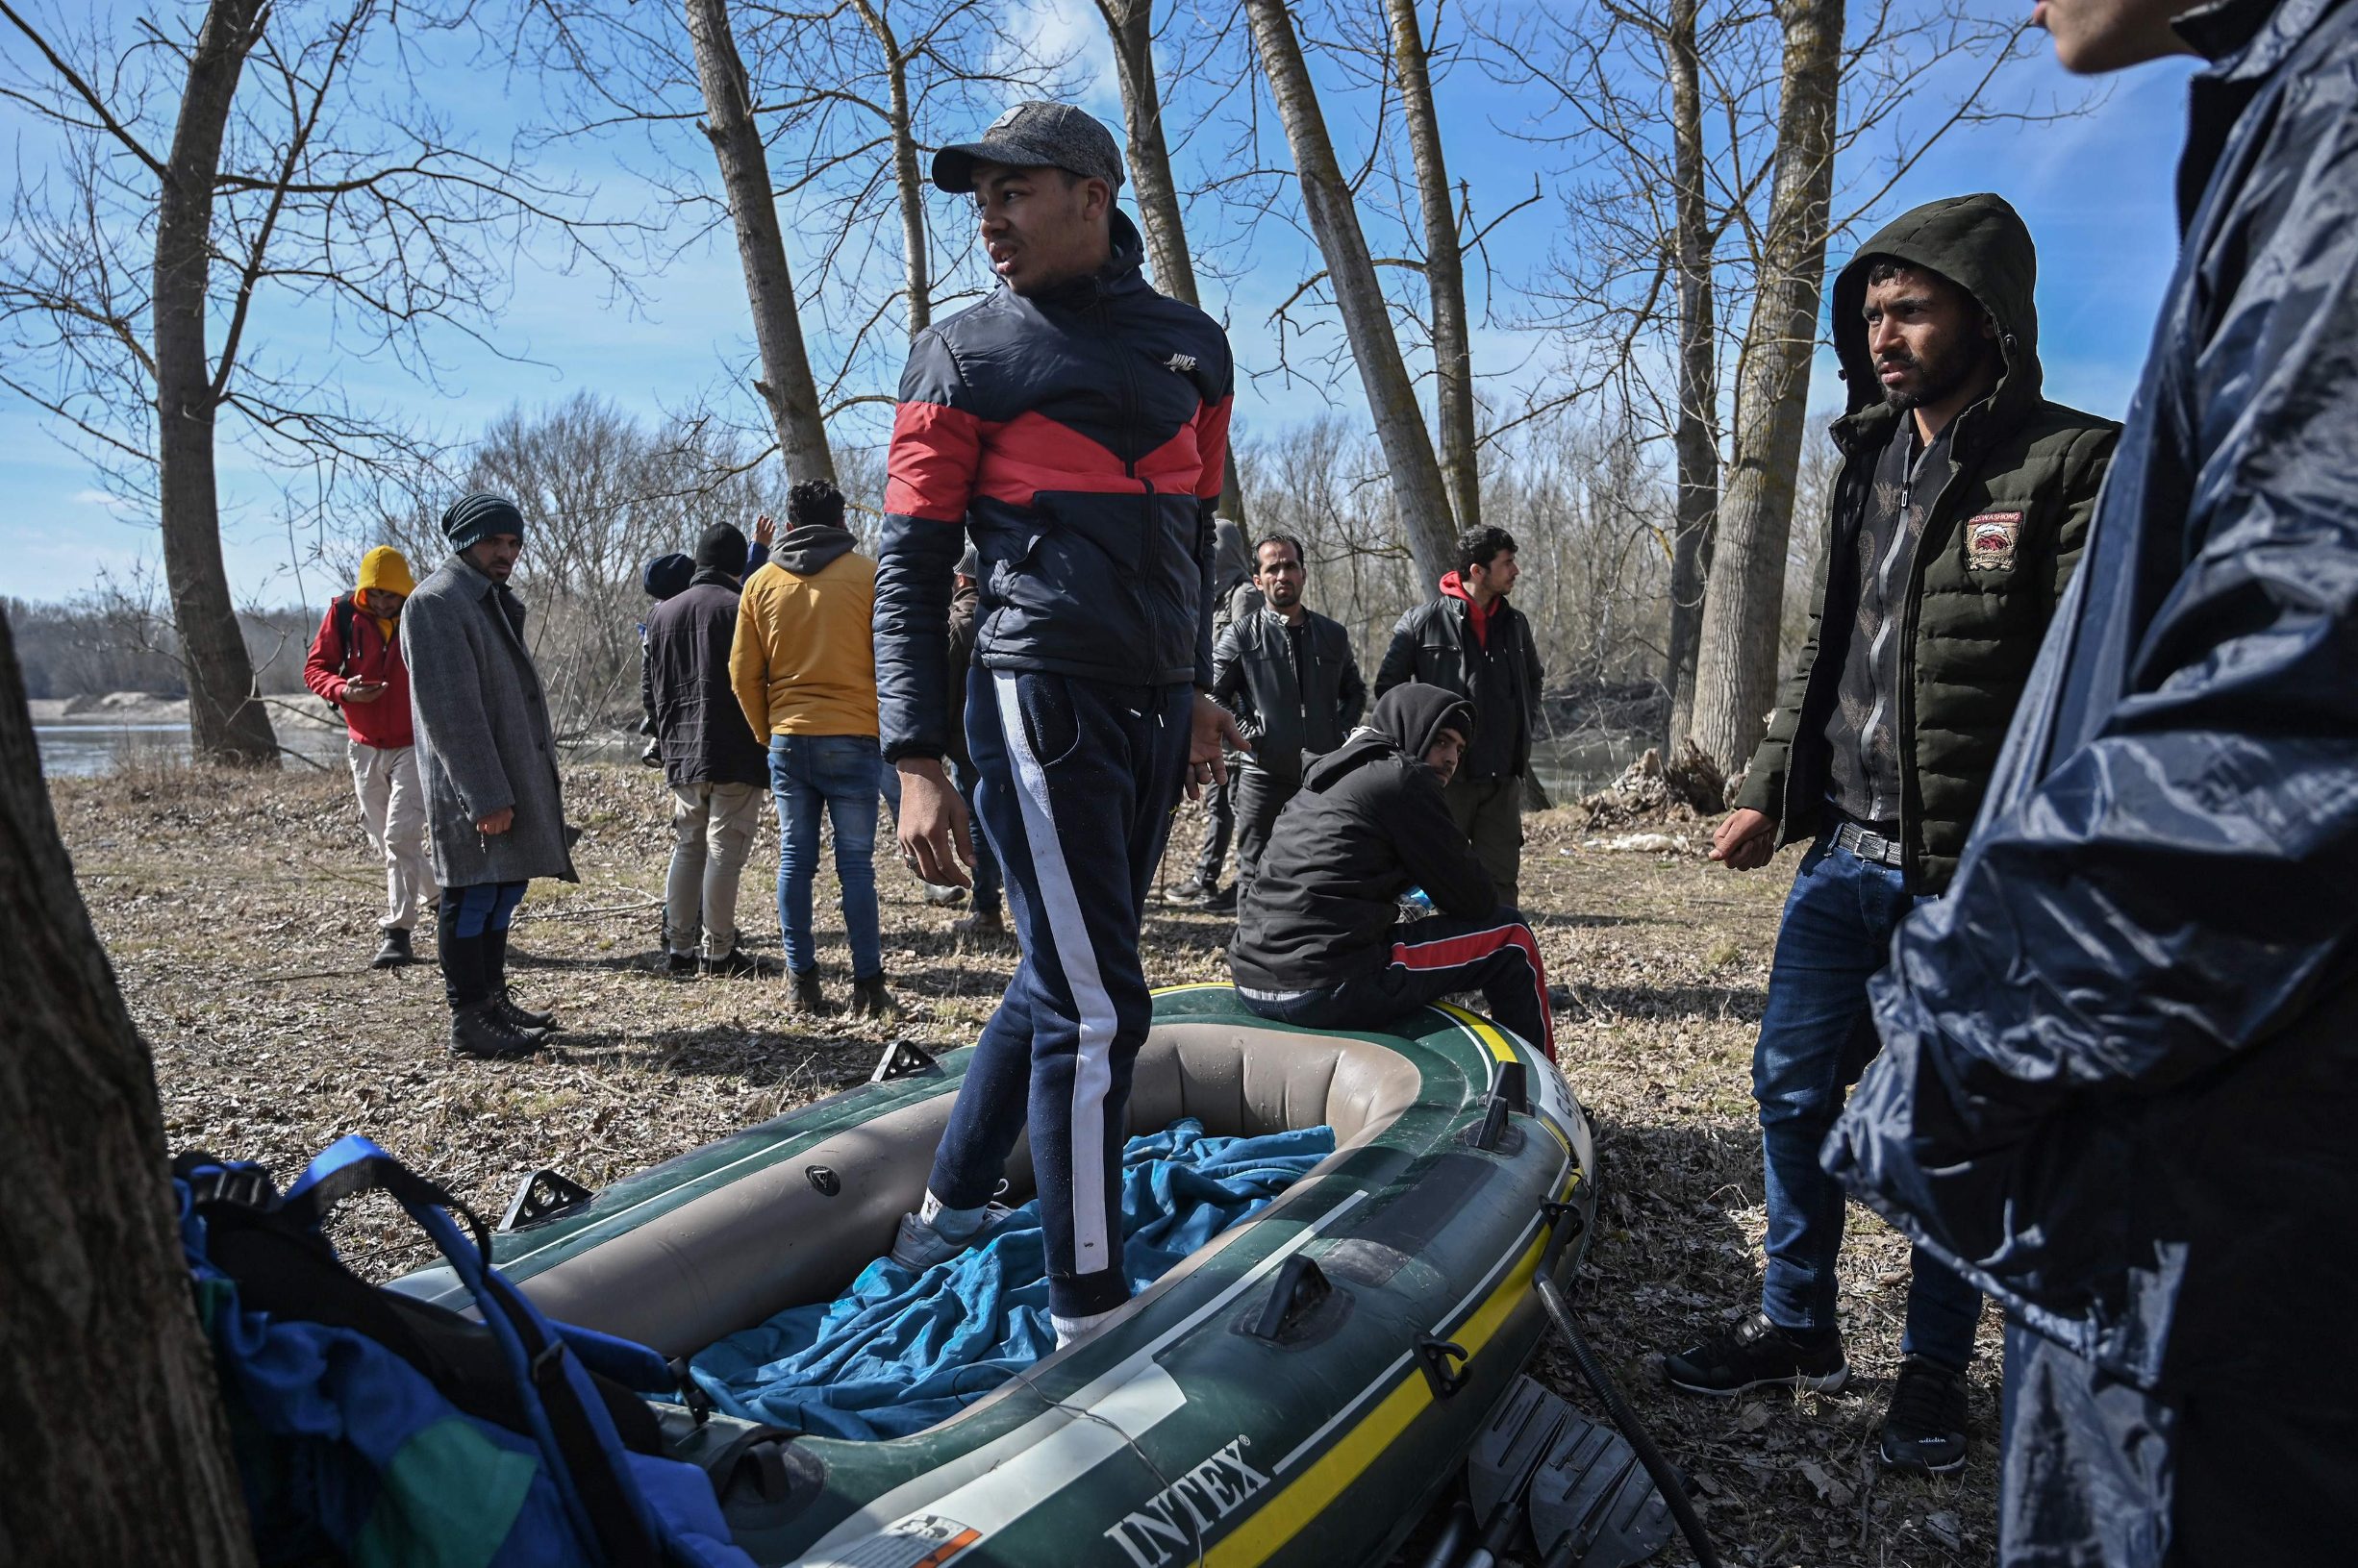 Migrants prepare a boat before an attempt to cross the Meritsa river to enter Greece, near Edirne, Turkey, on March 1, 2020. - Thousands more migrants reached the Turkish border with Greece on March 1, 2020, AFP journalists said, after President threatened to let them cross into Europe. At least 2,000 people including women and children arrived on the morning from Istanbul and walked through a field towards the Pazarkule border gate, a correspondent said. The group included Afghans, Syrians and Iraqis. (Photo by Ozan KOSE / AFP)